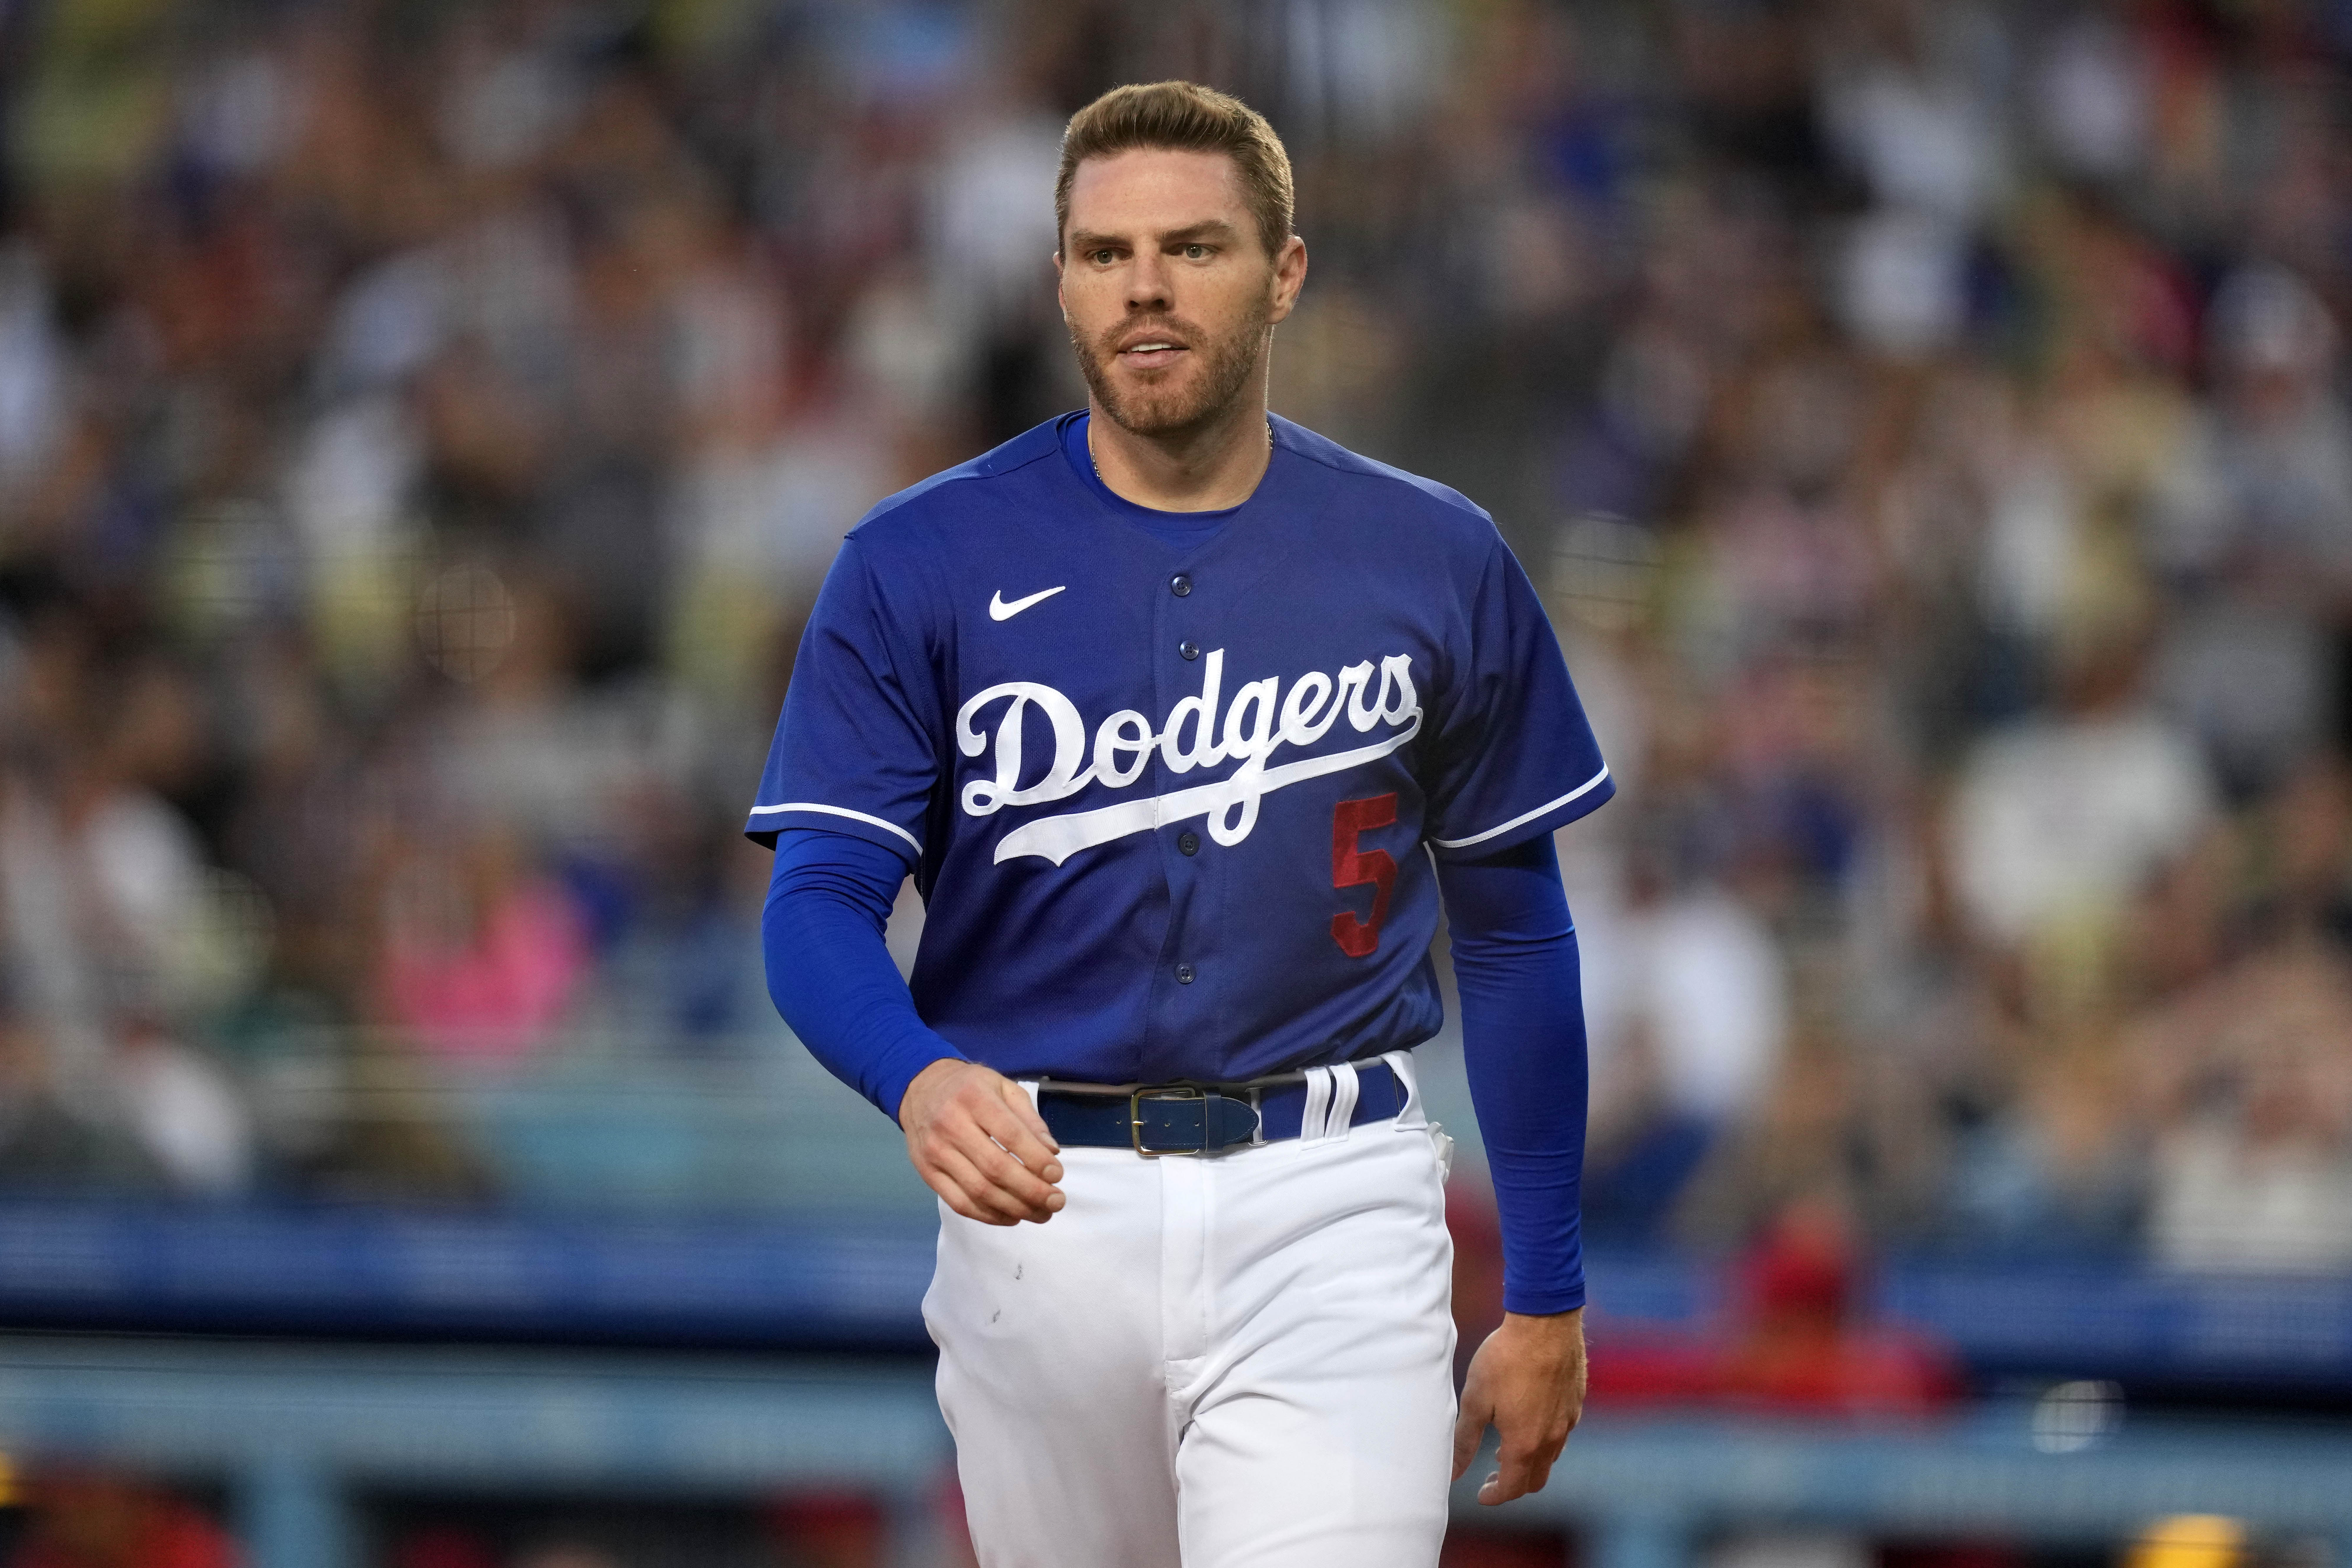 2022 Los Angeles Dodgers World Series, win total, pennant and division odds